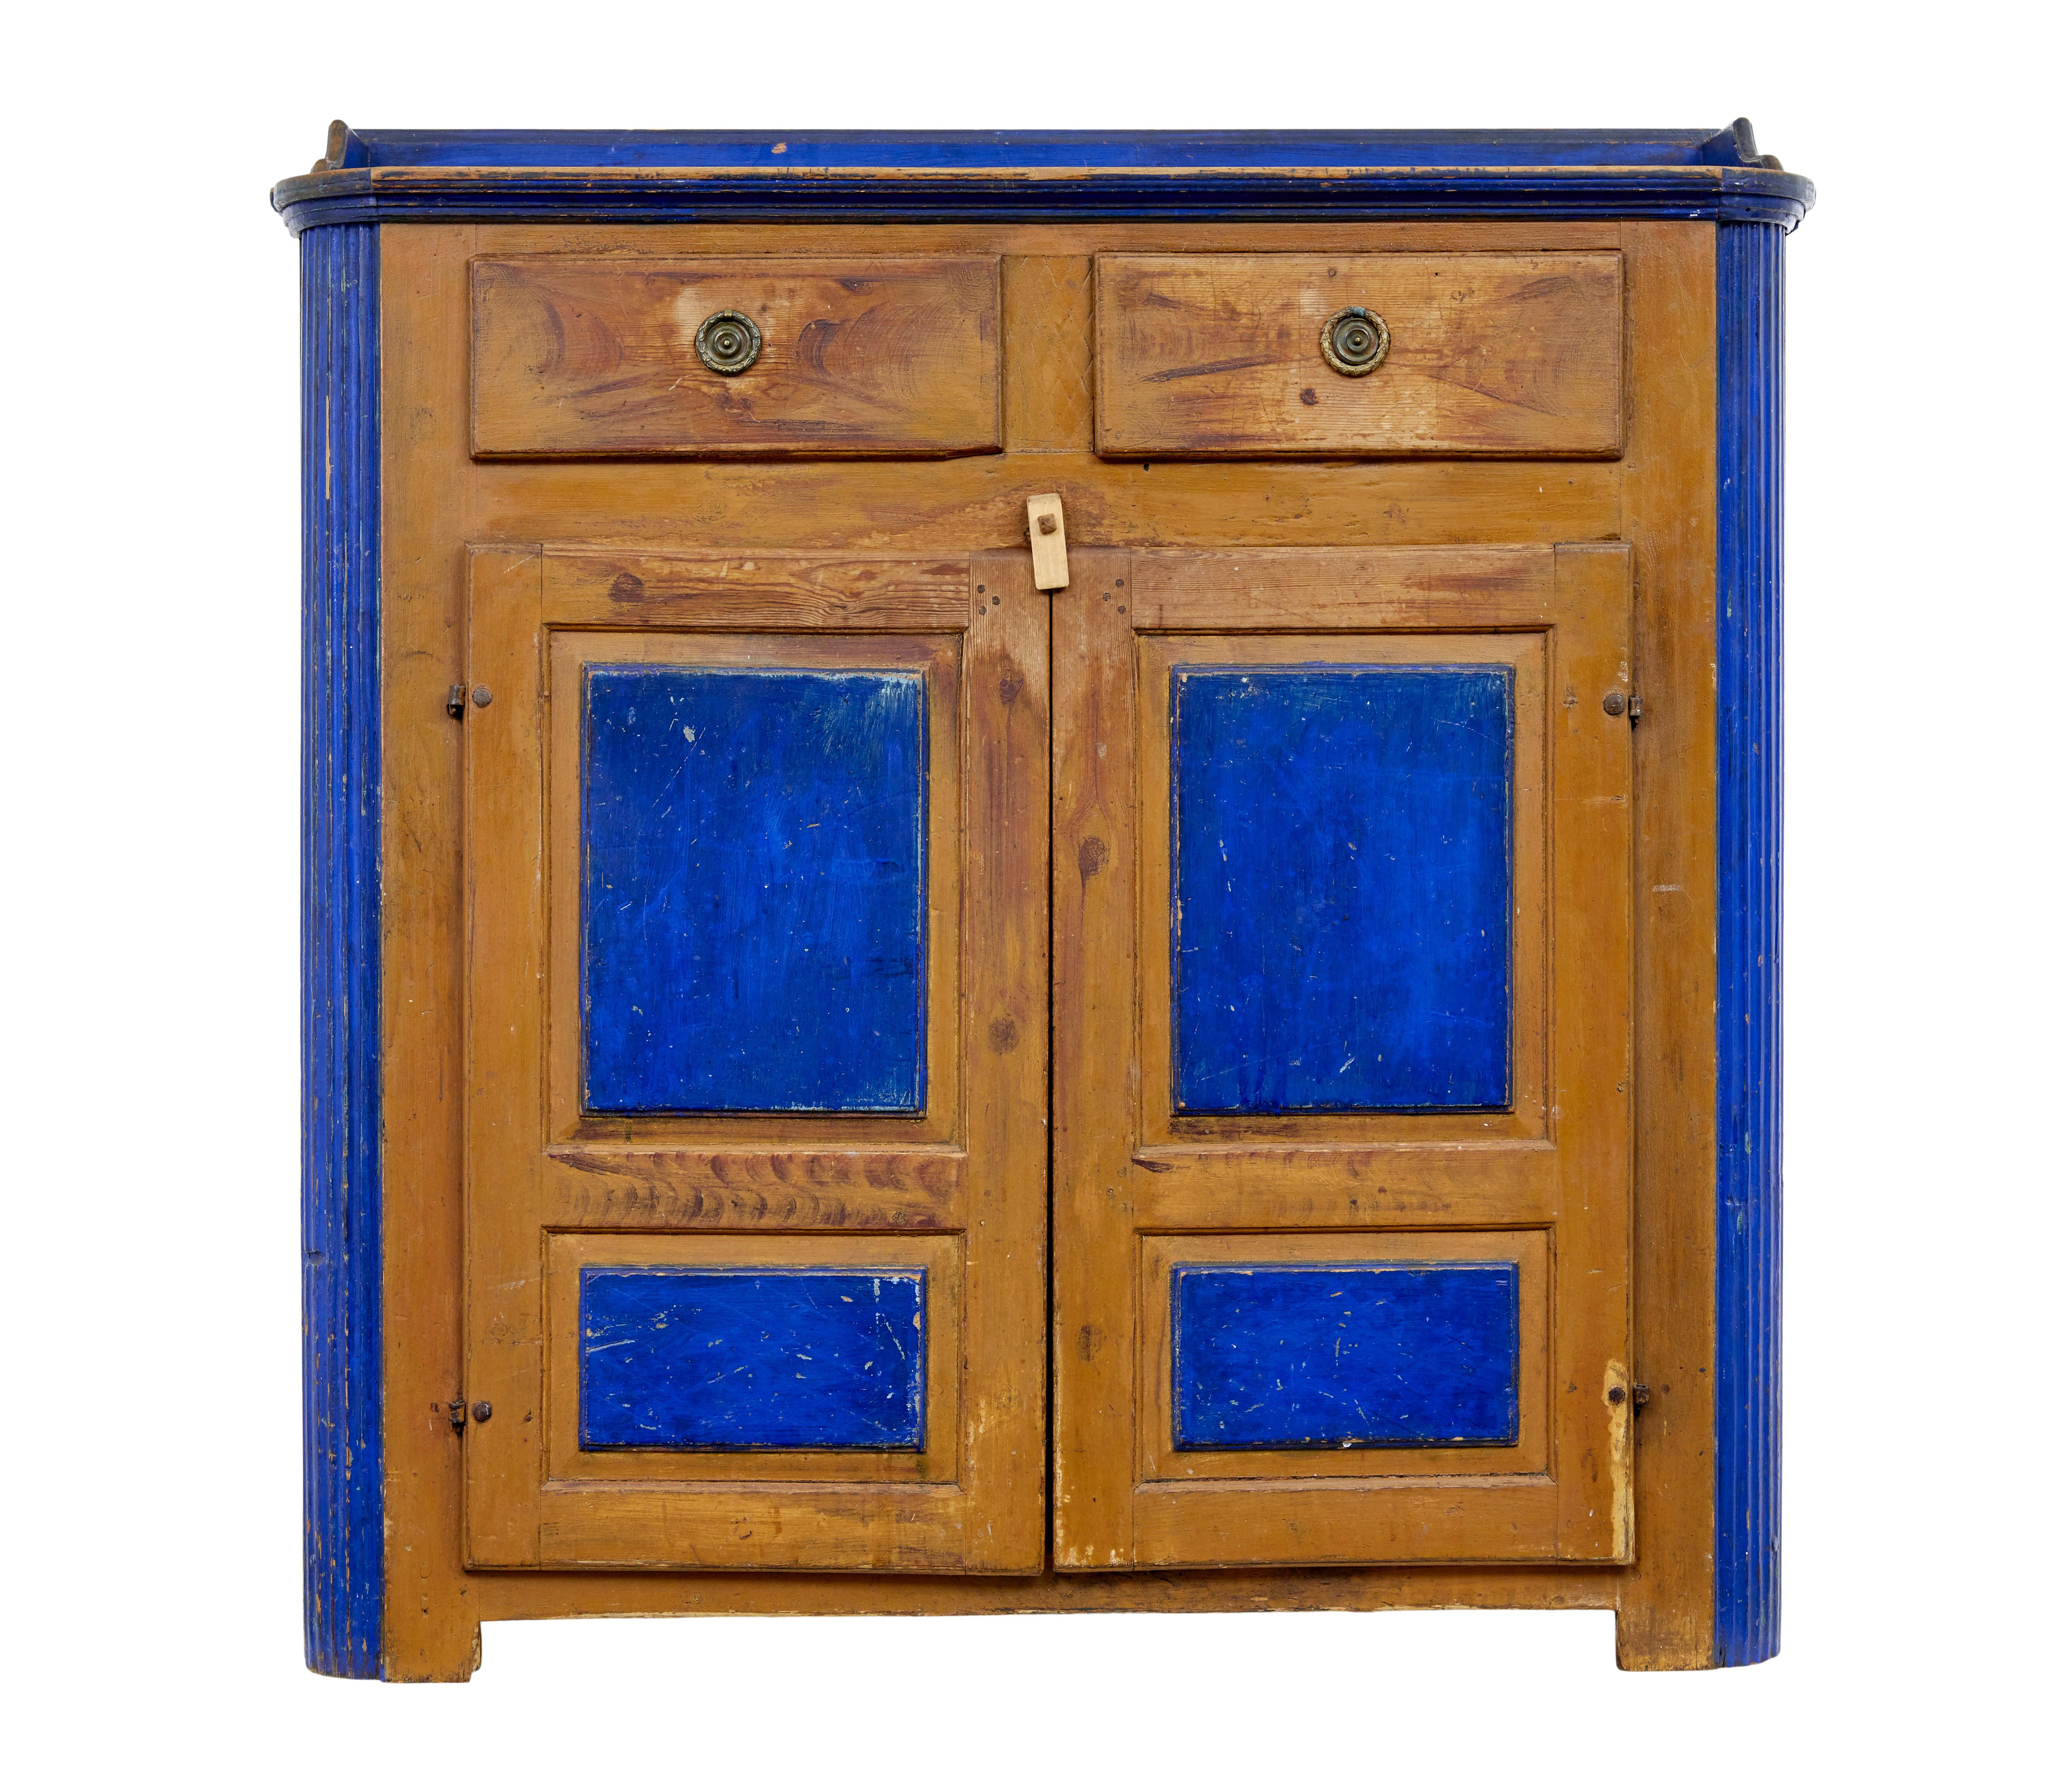 19th century Swedish pine painted kitchen cupboard circa 1880.

Rare and good quality pine sideboard come dresser base. Painted with a cobolt blue scheme to the top, door panels and sides.

Top with gallery with top drawers below. Double door